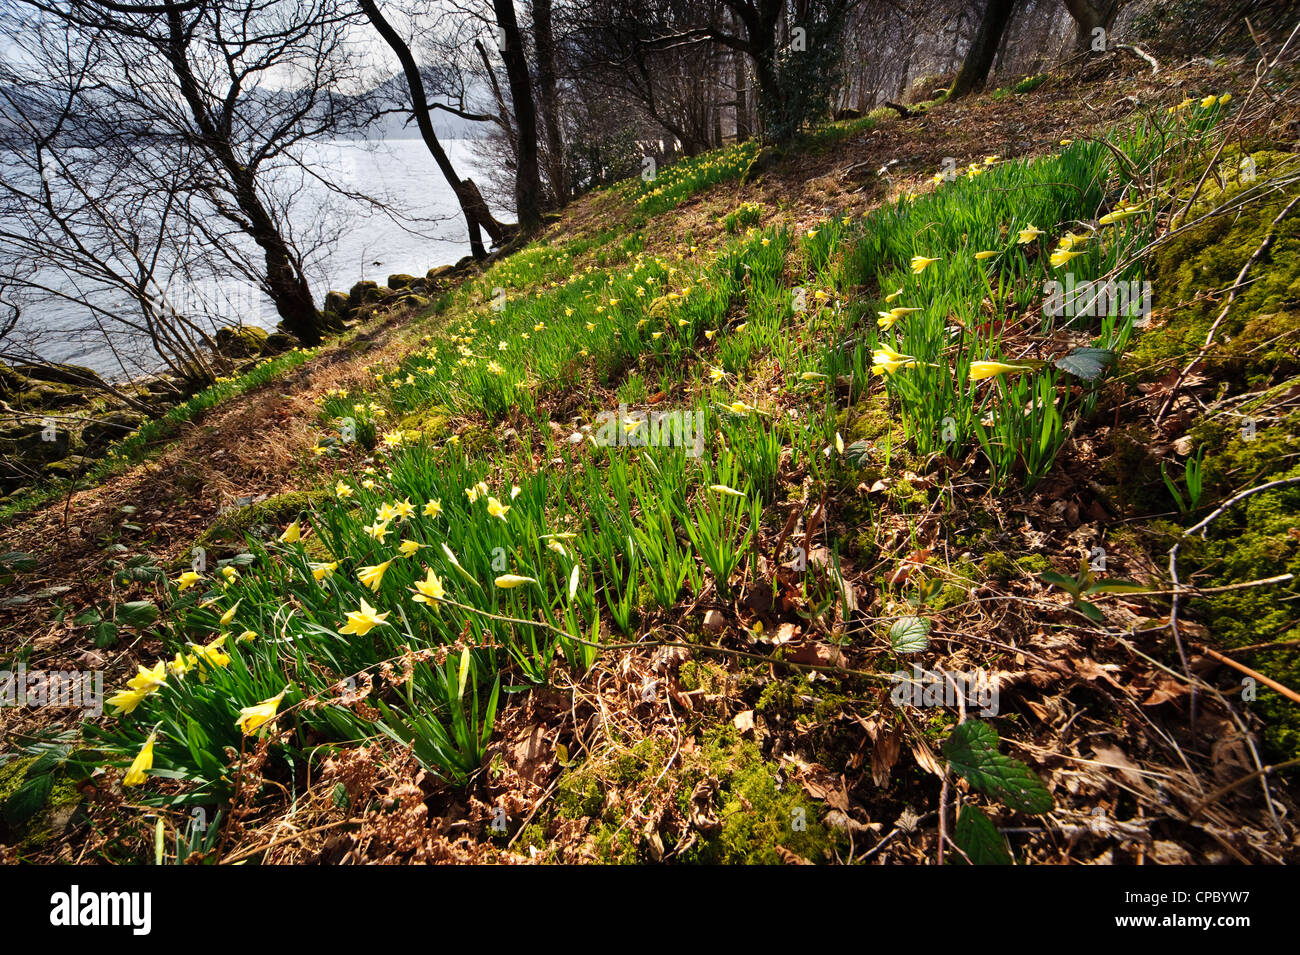 Wild daffodils at Glencoyne, Ullswater, the location made famous by Wordsworth’s poem “I wandered lonely as a cloud’ Stock Photo